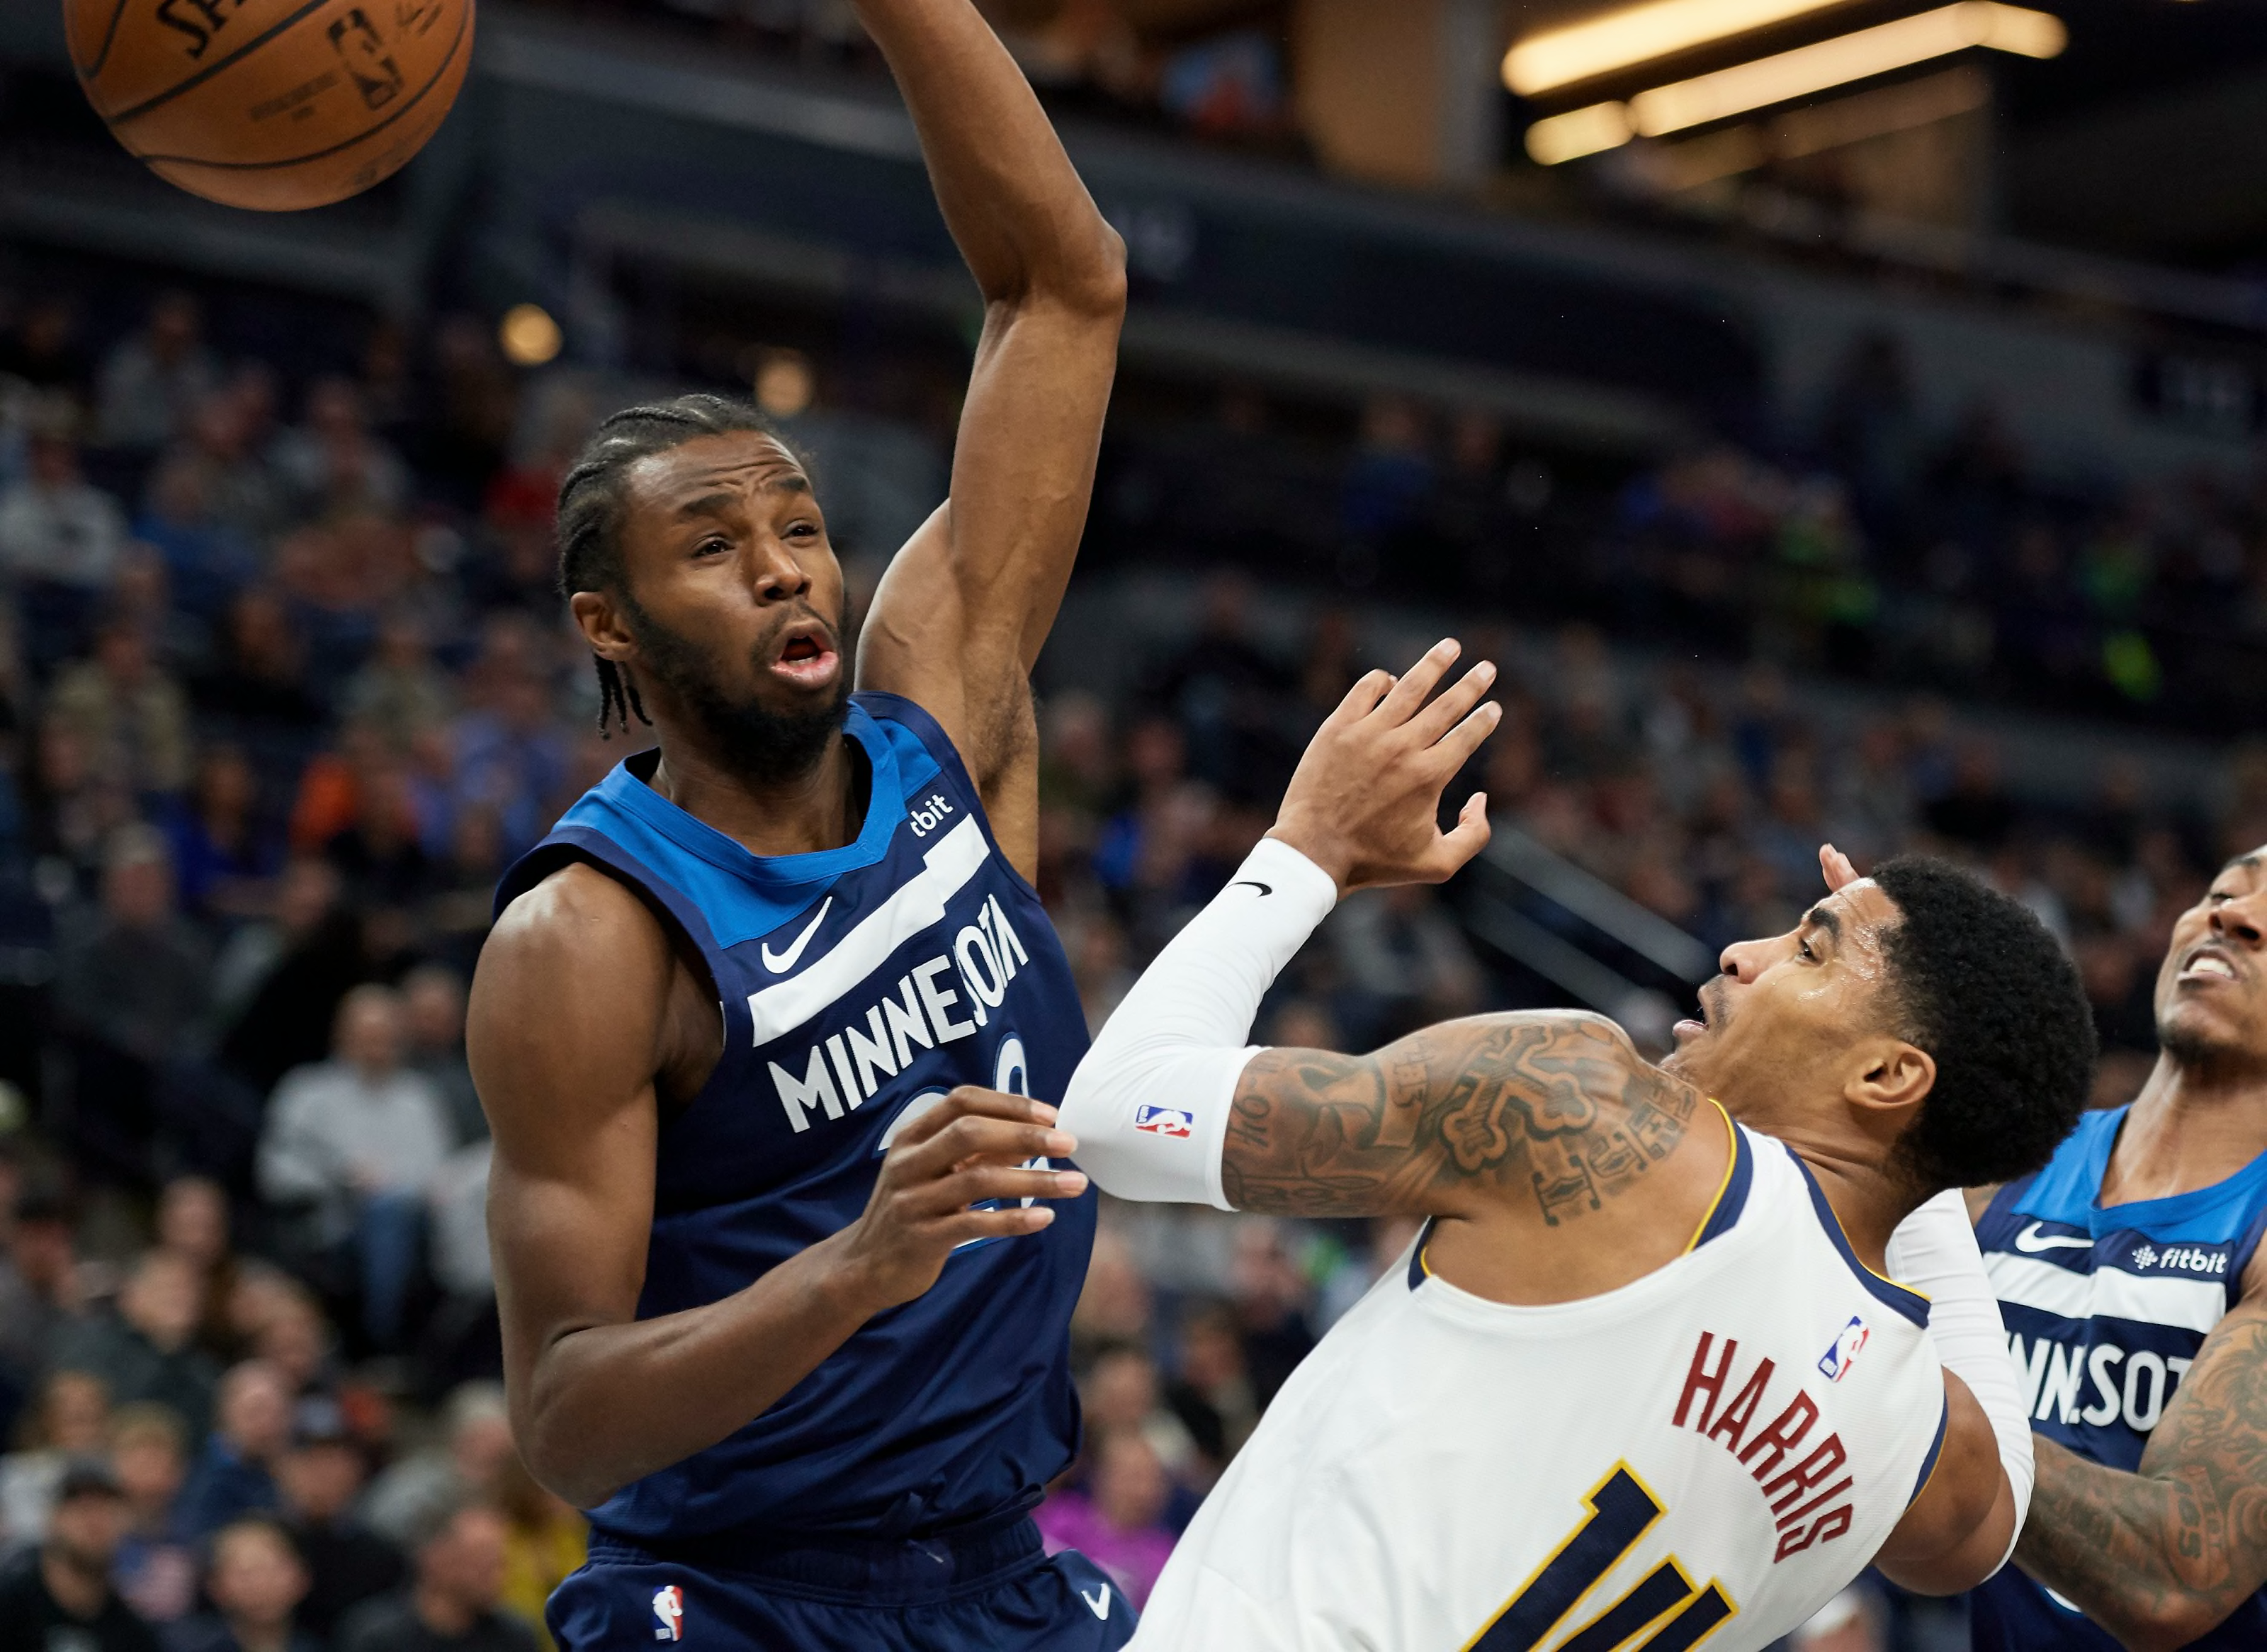 Minnesota Timberwolves What if Andrew Wiggins missed the free throws?